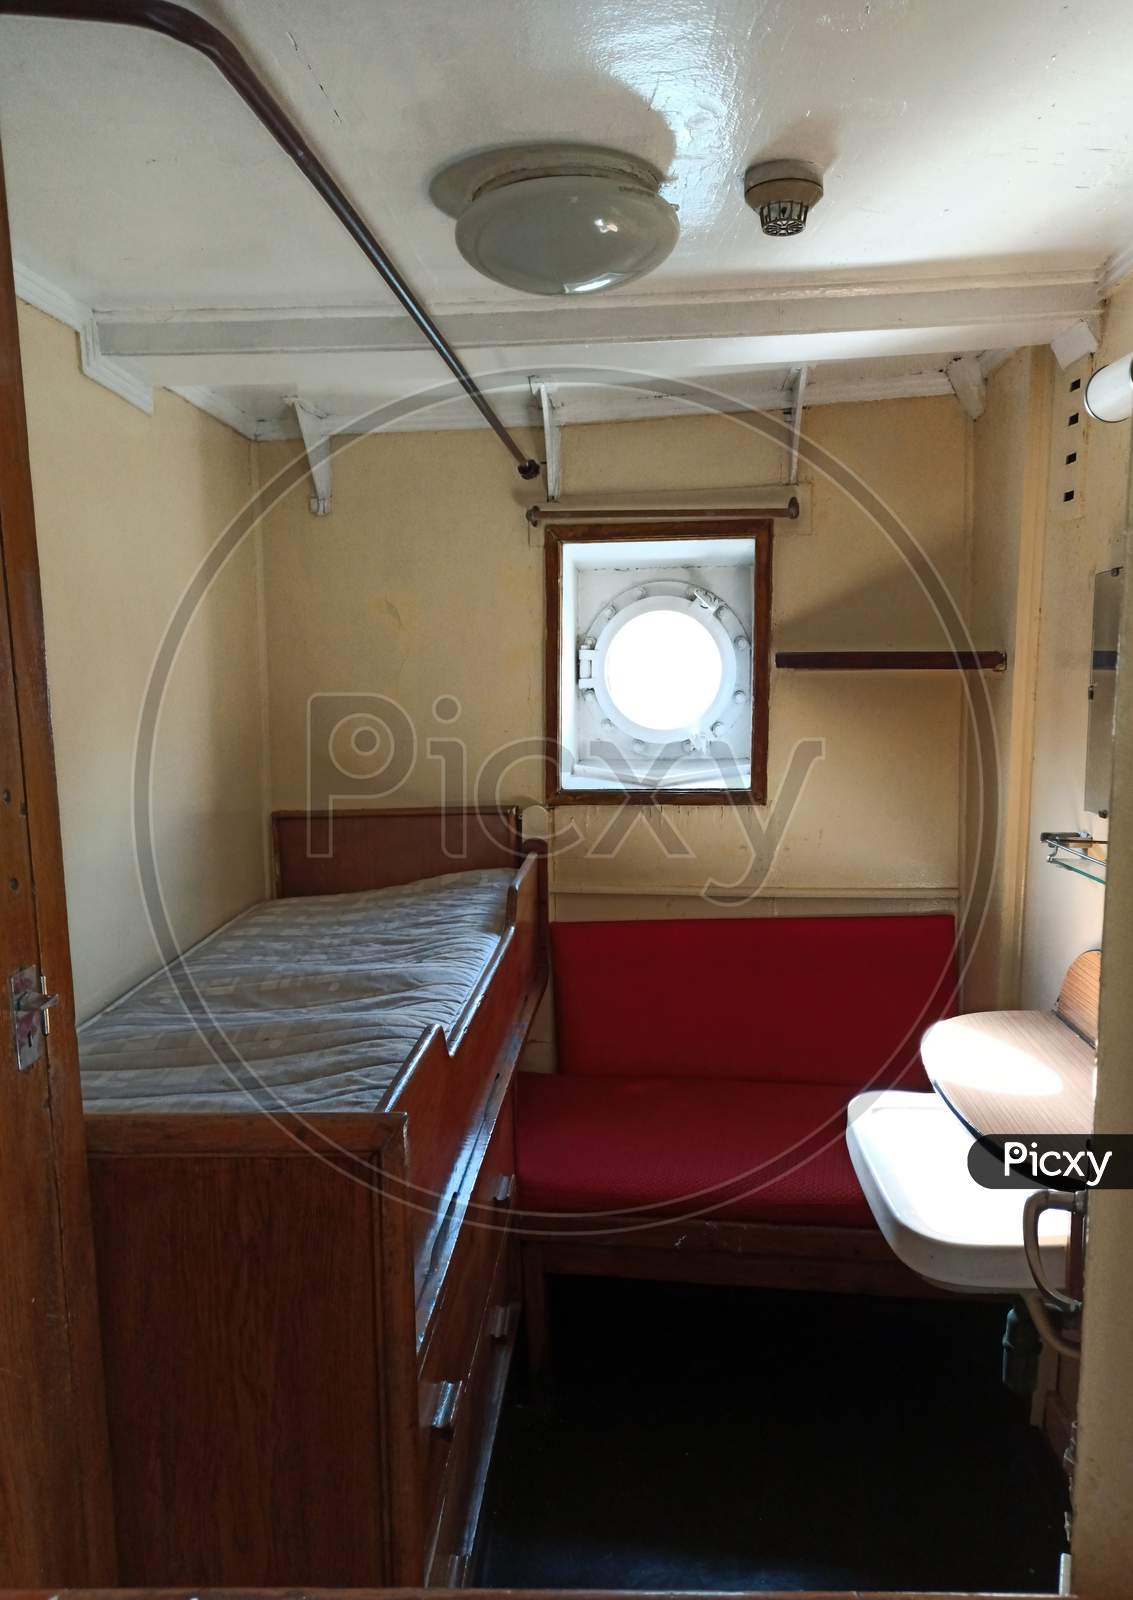 Gdansk, Poland - May 07, 2020: Cabin With Congested Sitting And Sleeping Area With Round Window Inside The Ss Soldek Ship, Part Of The Polish Maritime Museum In Gdansk Near Baltic Sea, Europe